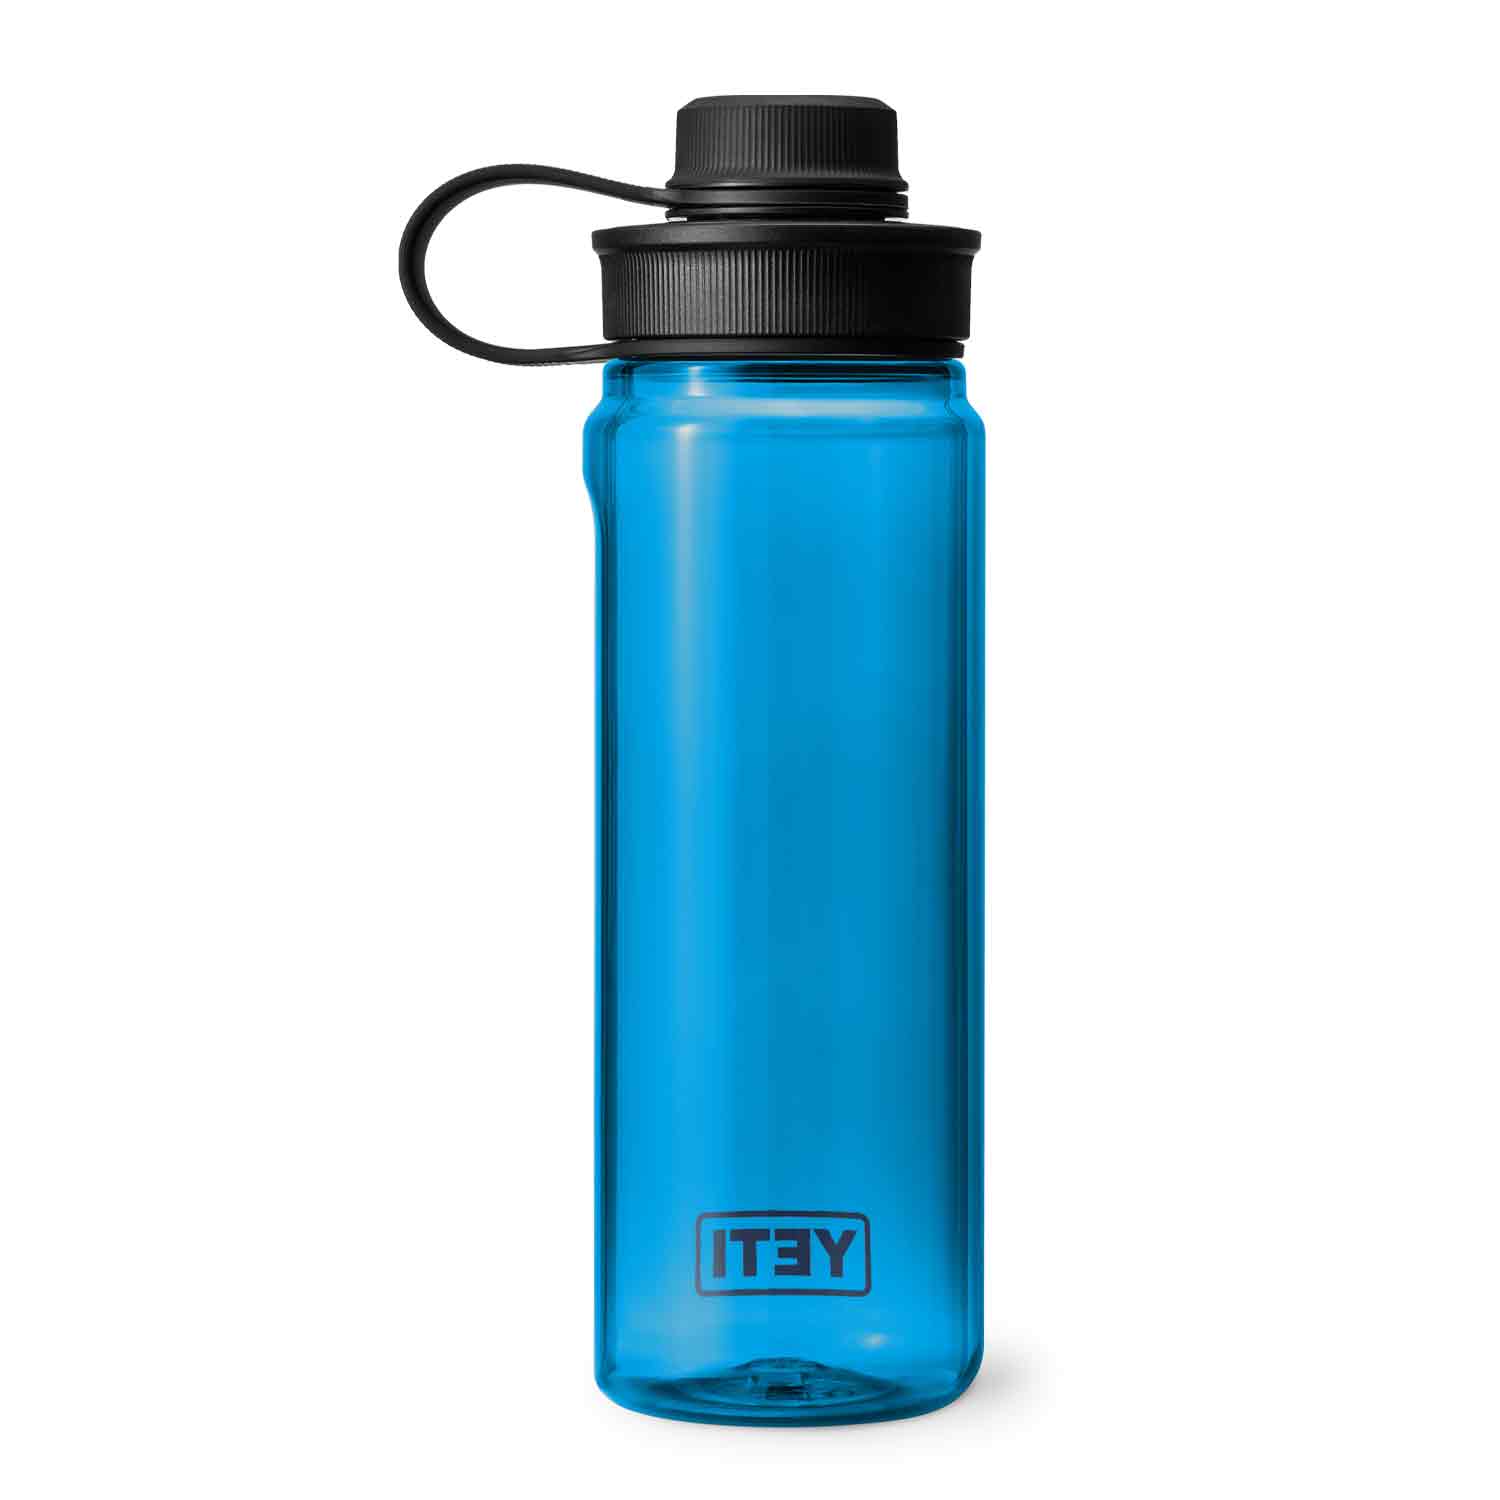 YETI Yonder 25oz Bottle with Tether Cap (Limited Edition Colors)